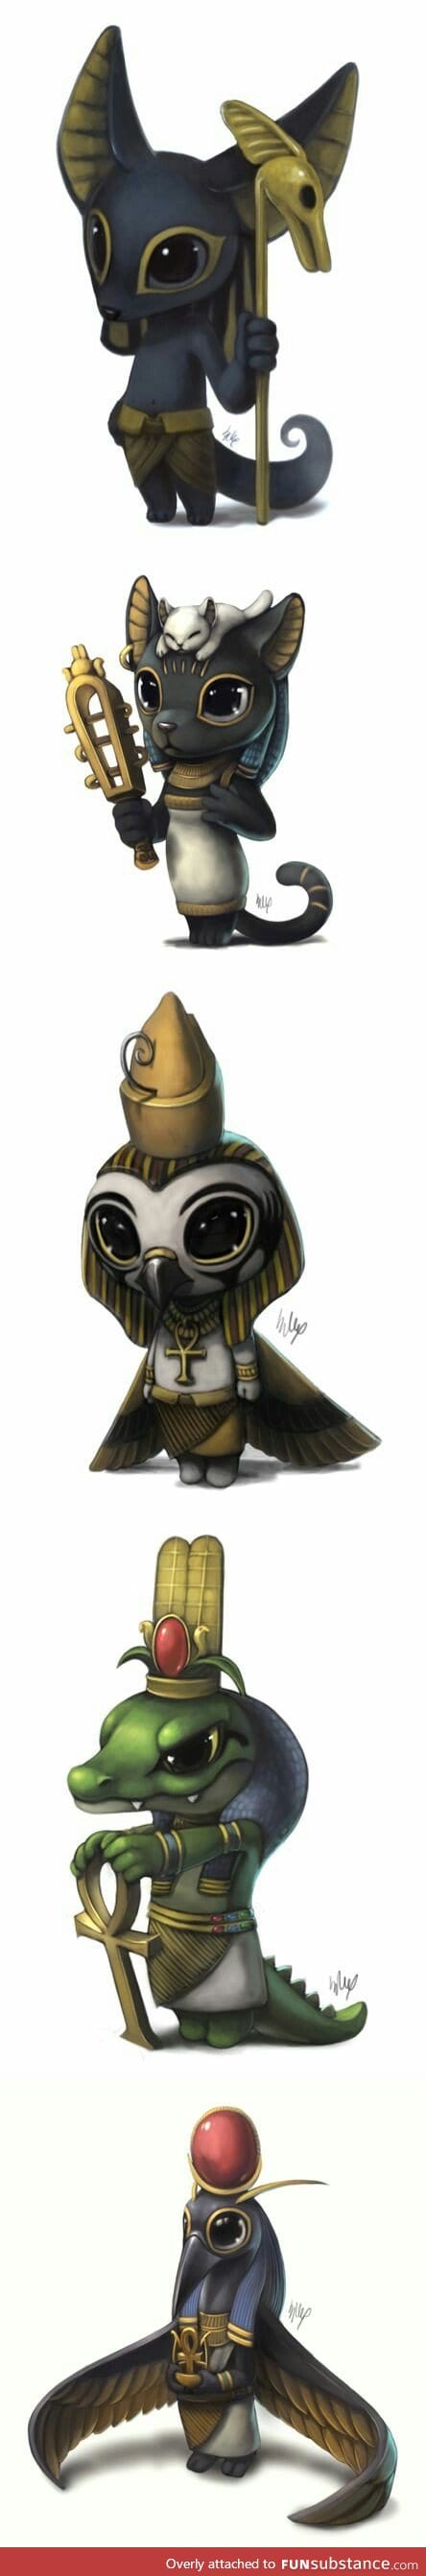 Egyptian gods have never been so adorable